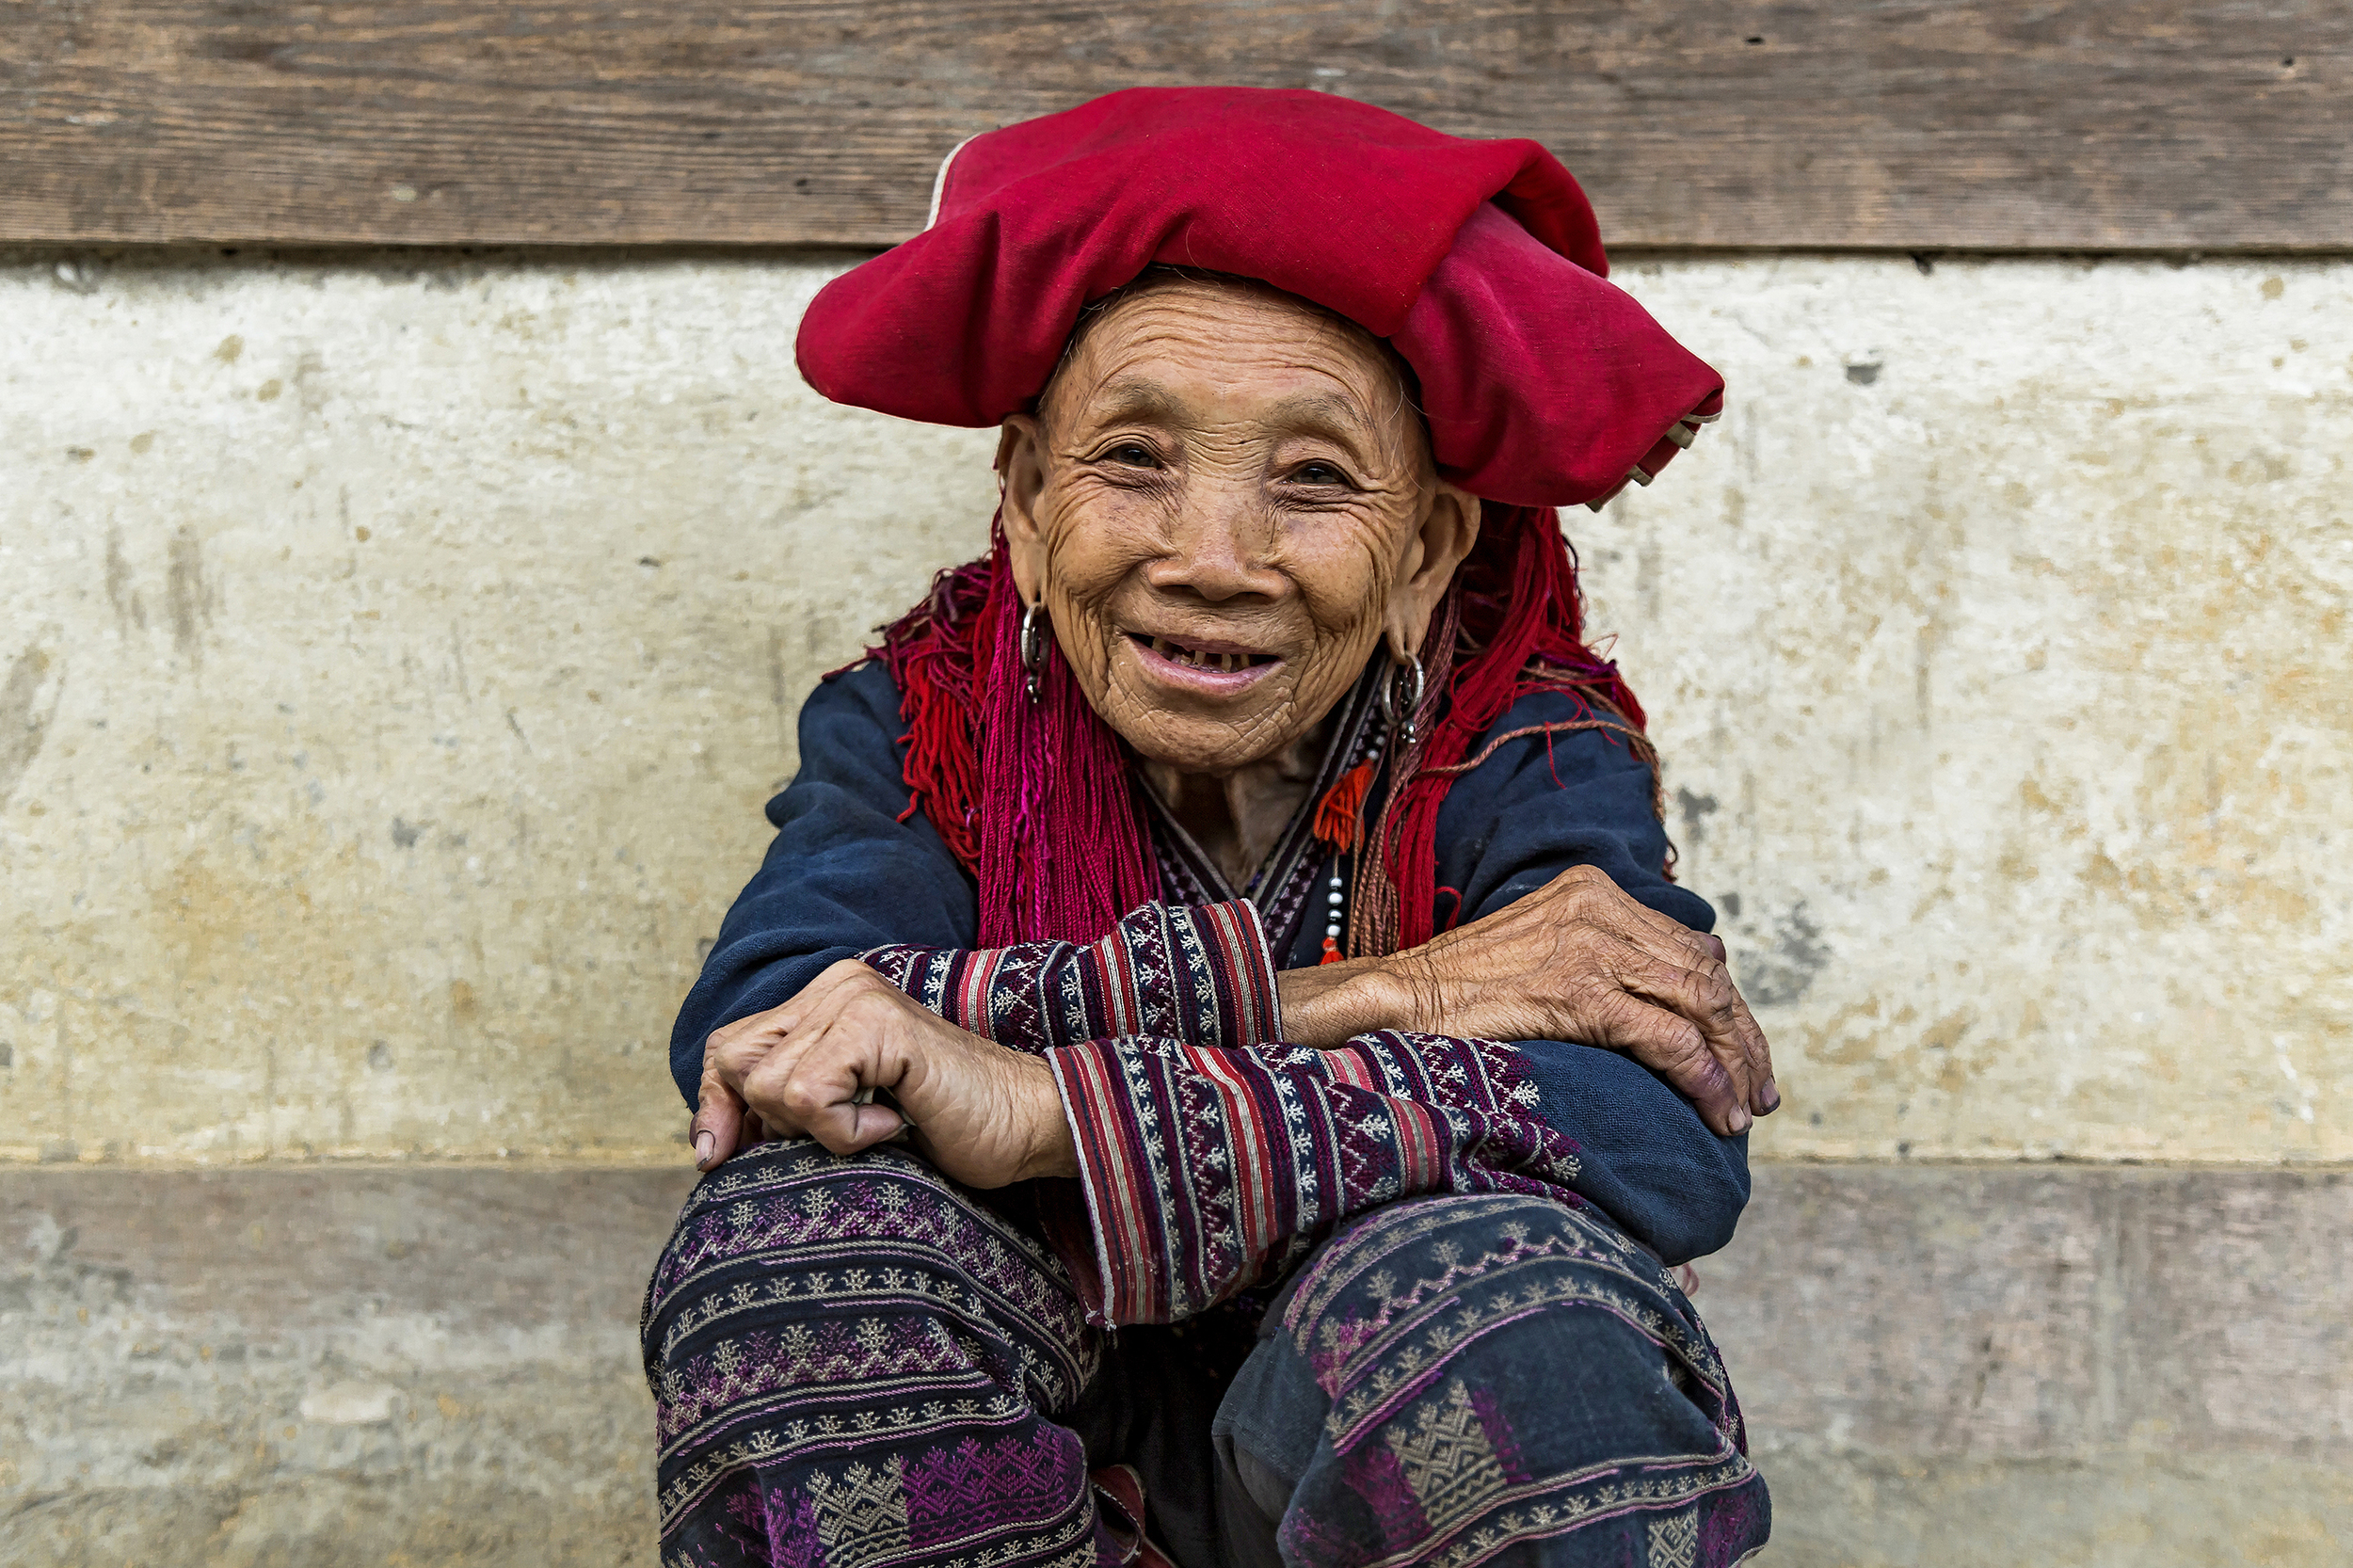 A local woman sitting and smiling